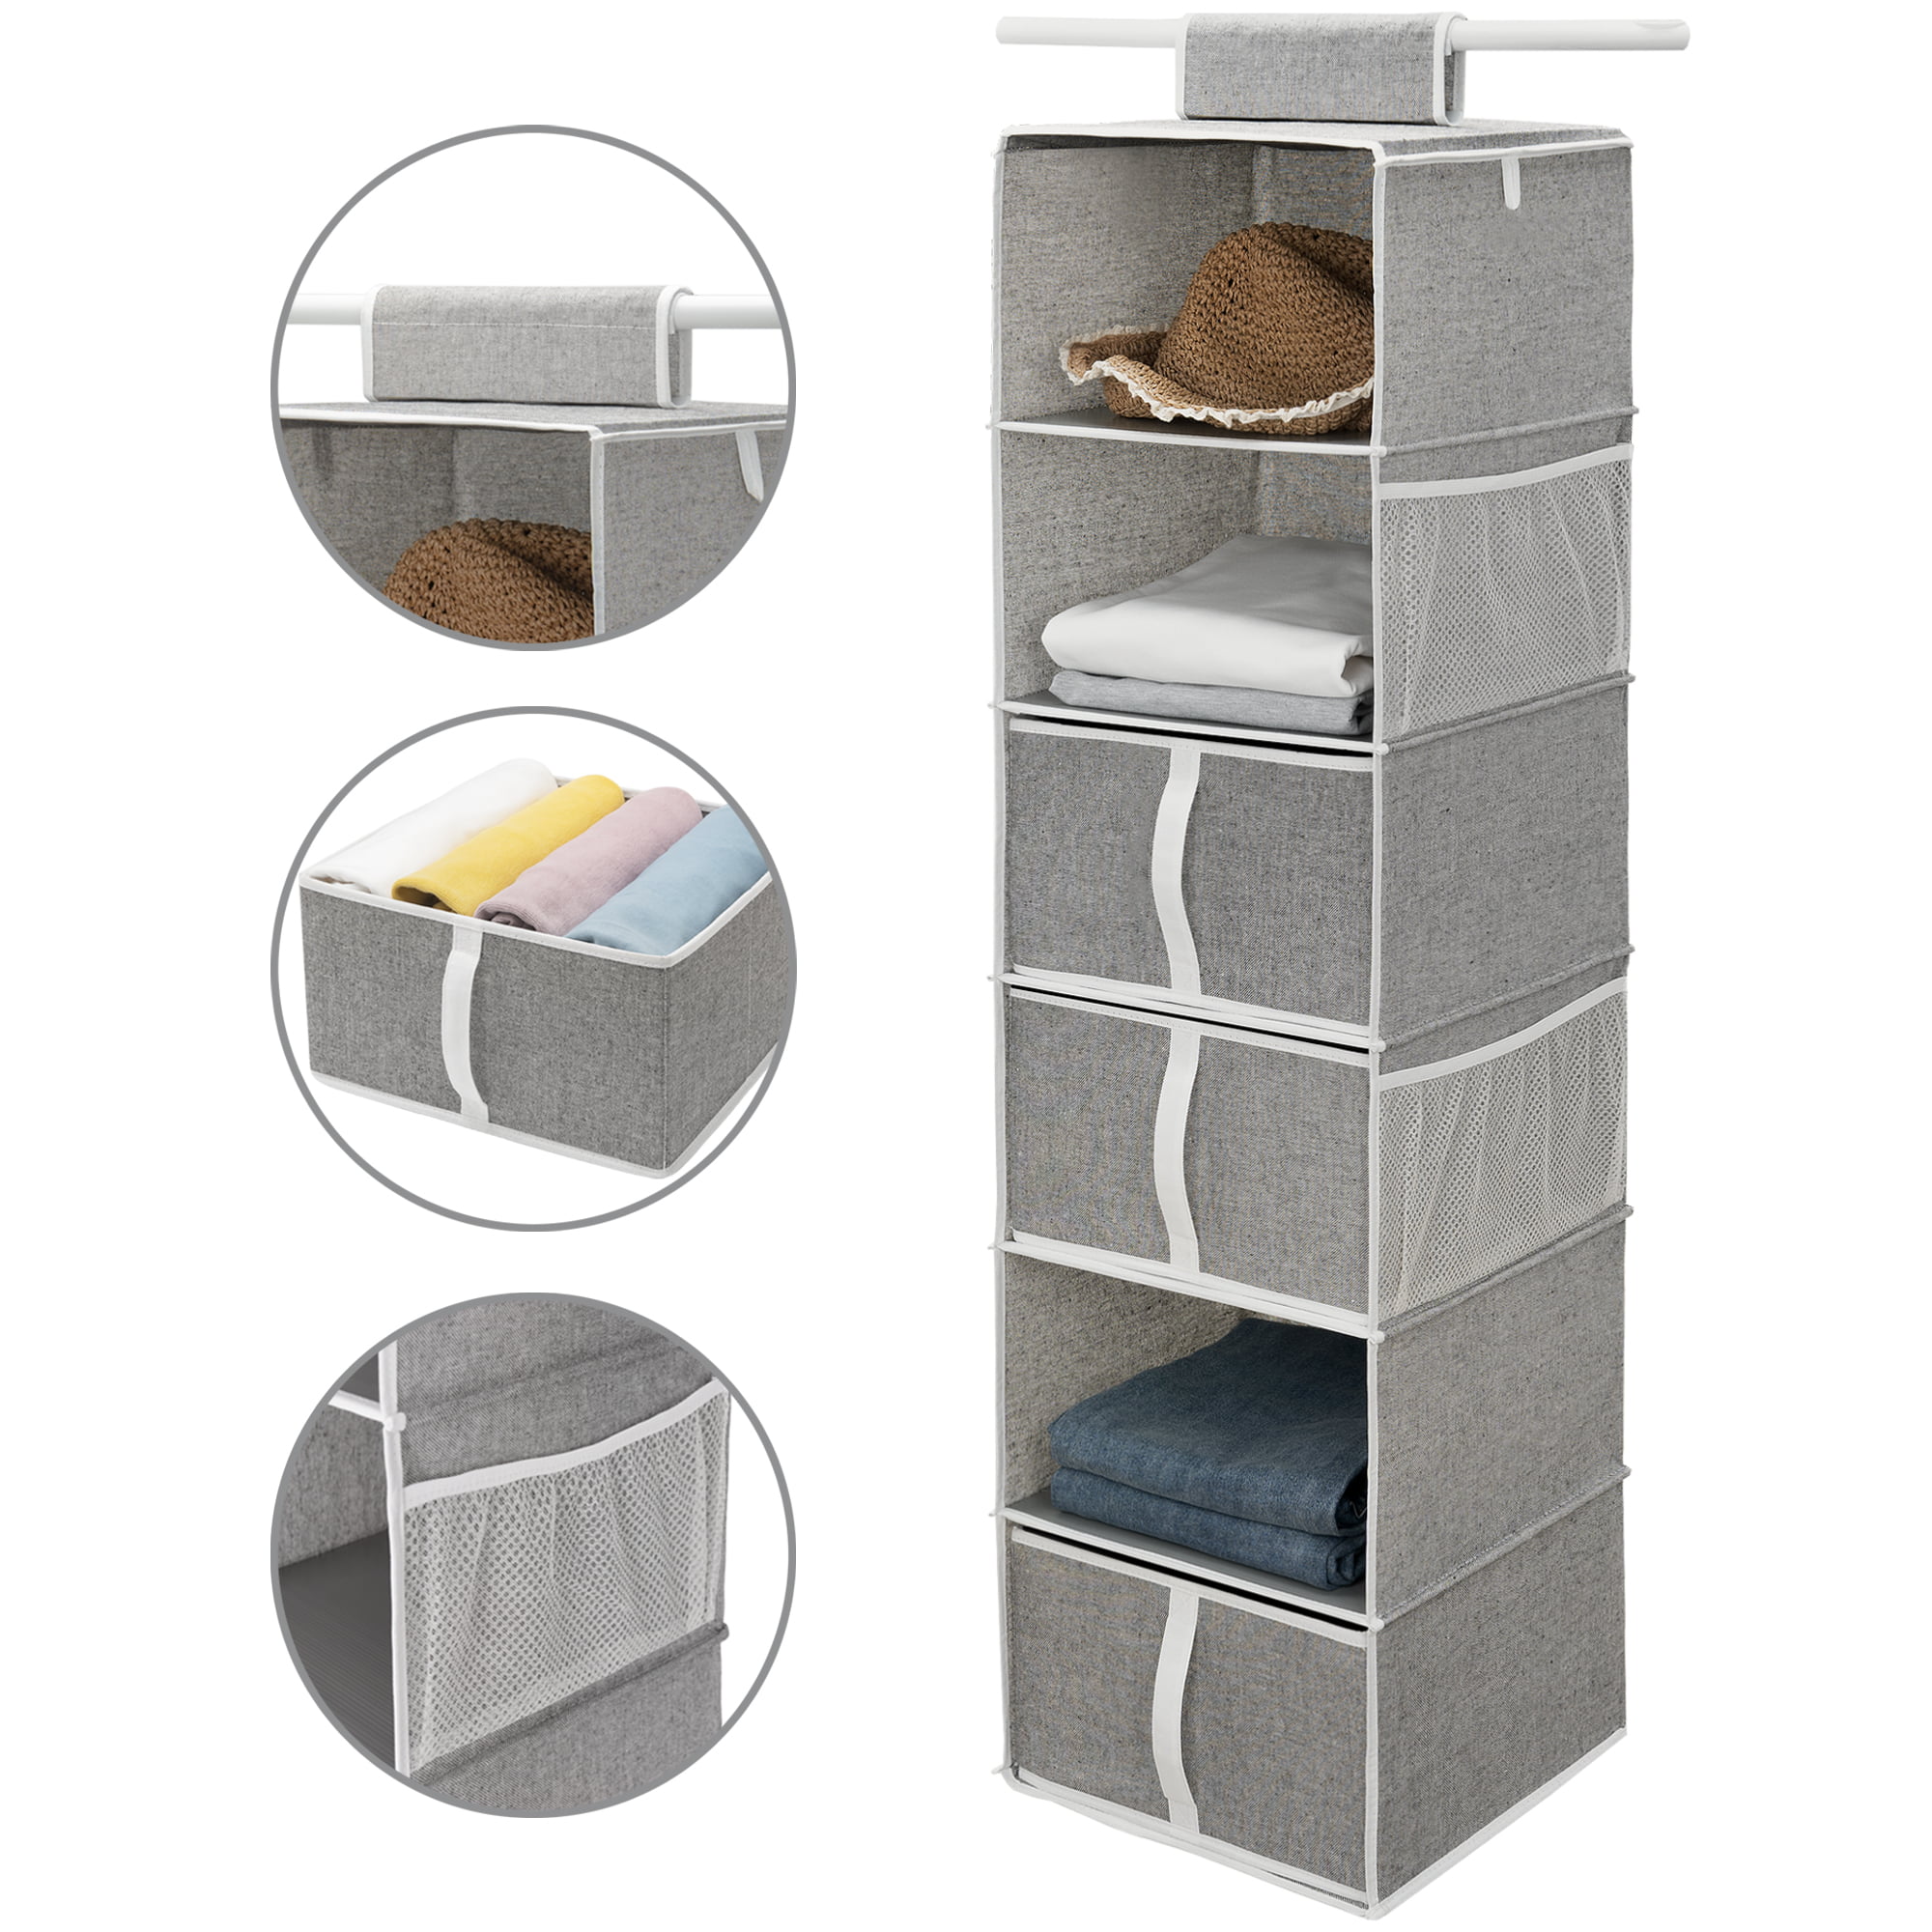  MSR Imports Pull Down Hanging Closet Caddy - Storage Space  Organization System Gray : Home & Kitchen